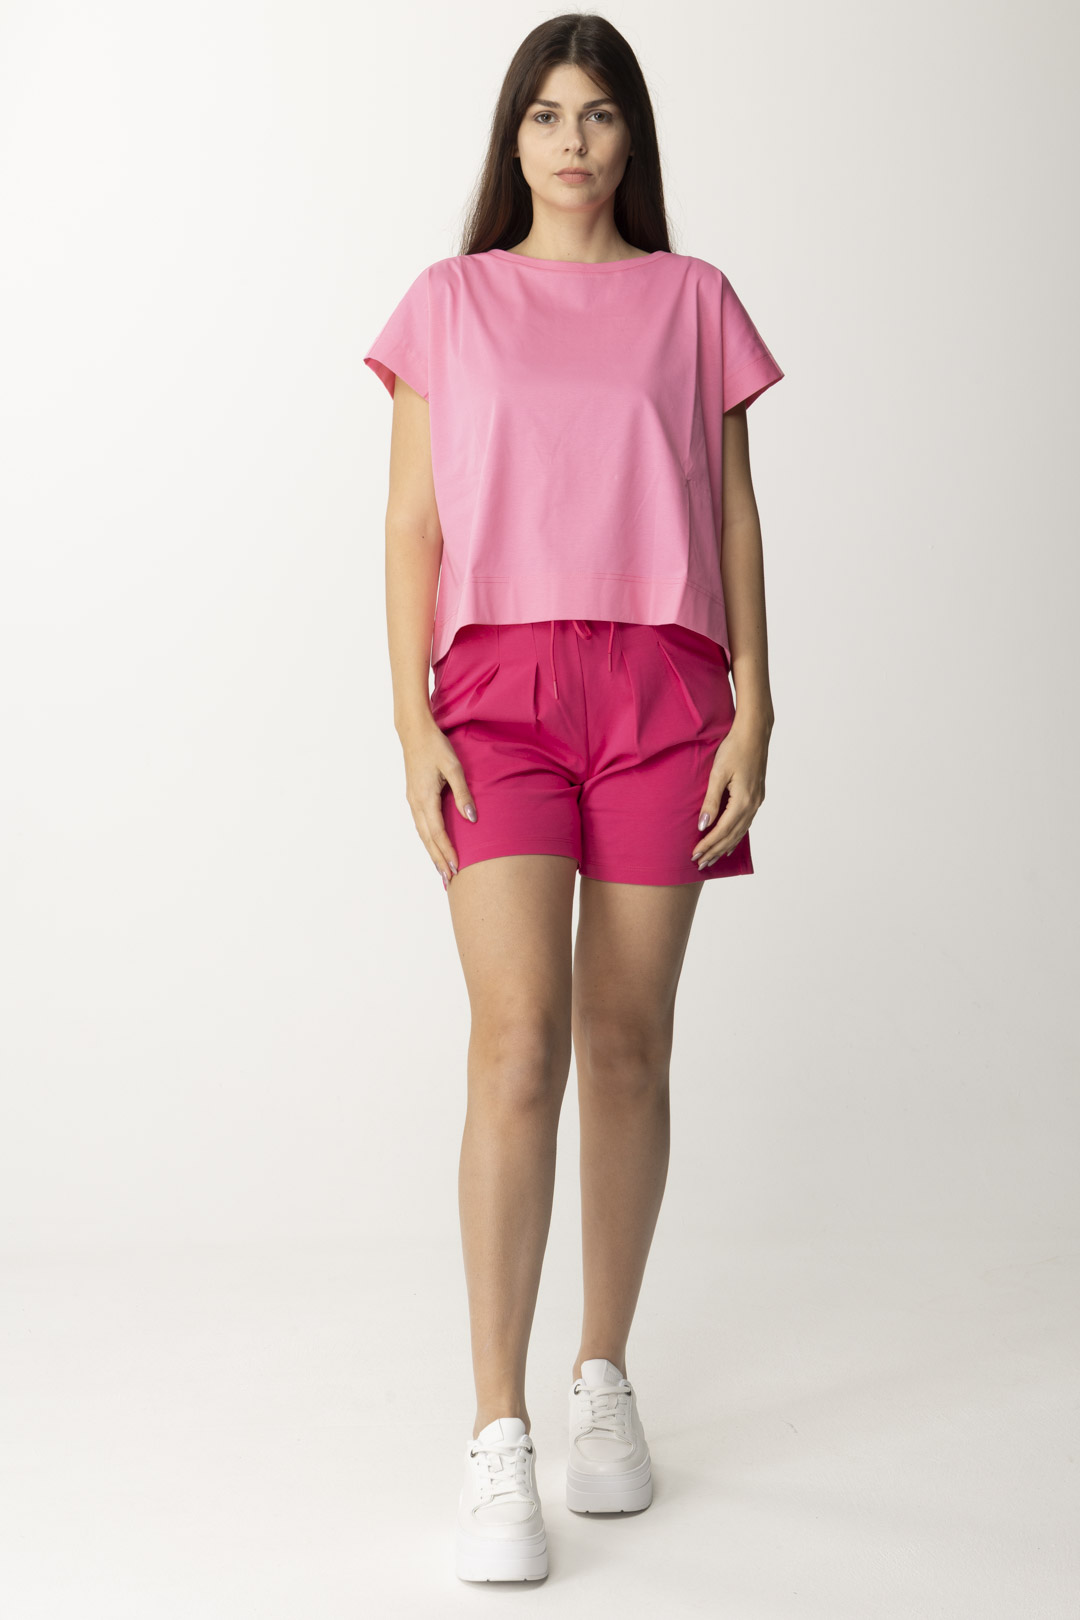 Preview: People Of Shibuya Boat Neck Oversized T-Shirt Rosa